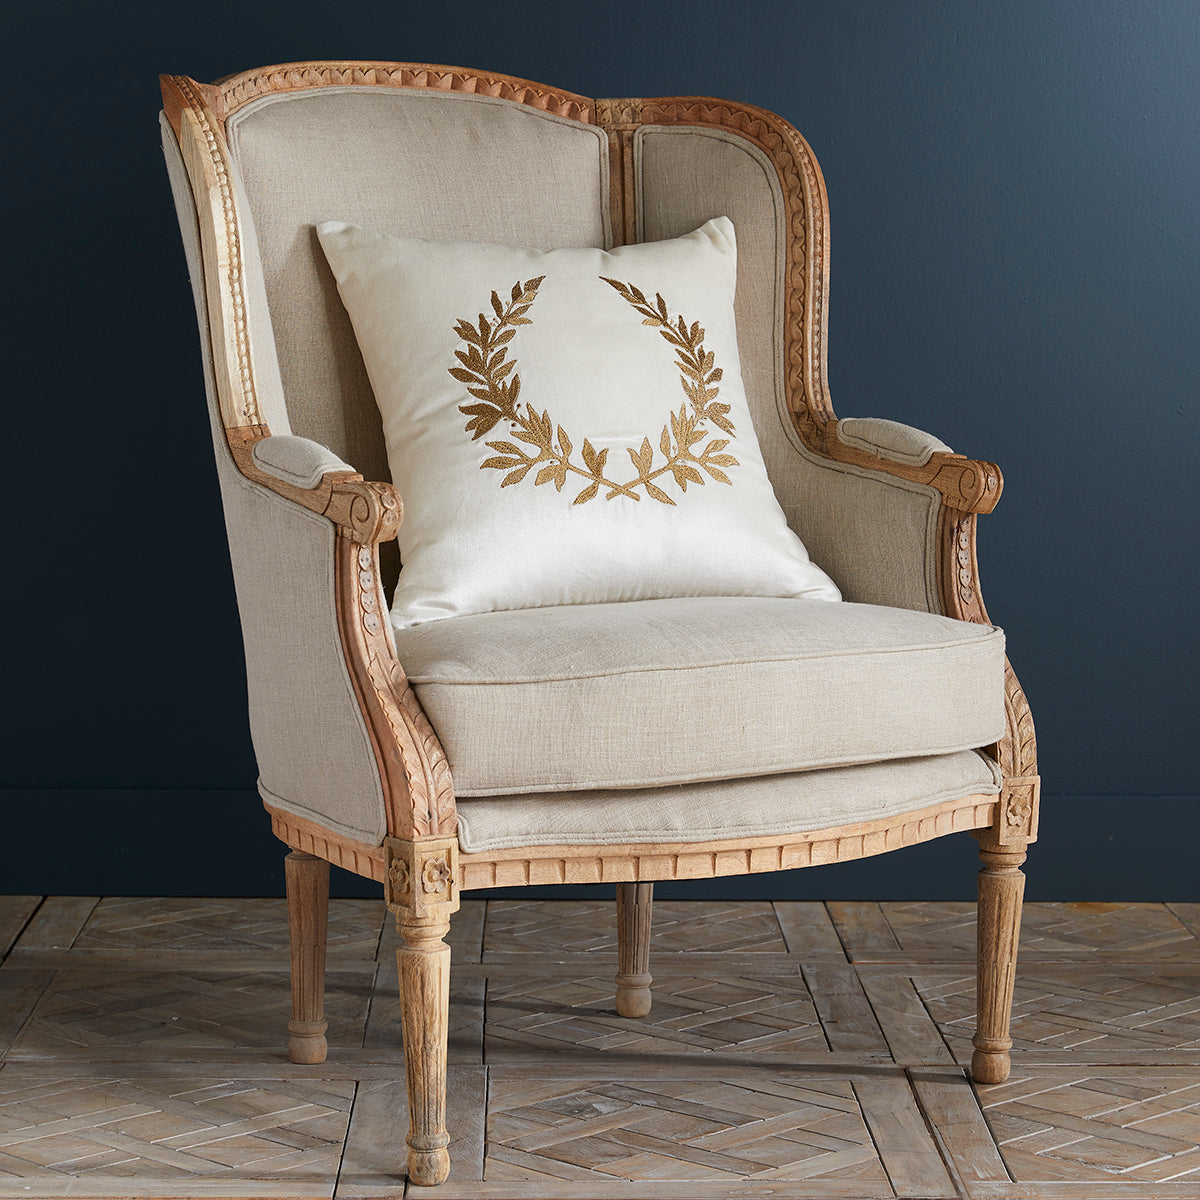 Natural linen Louis XV Wing Chair with a pillow on top